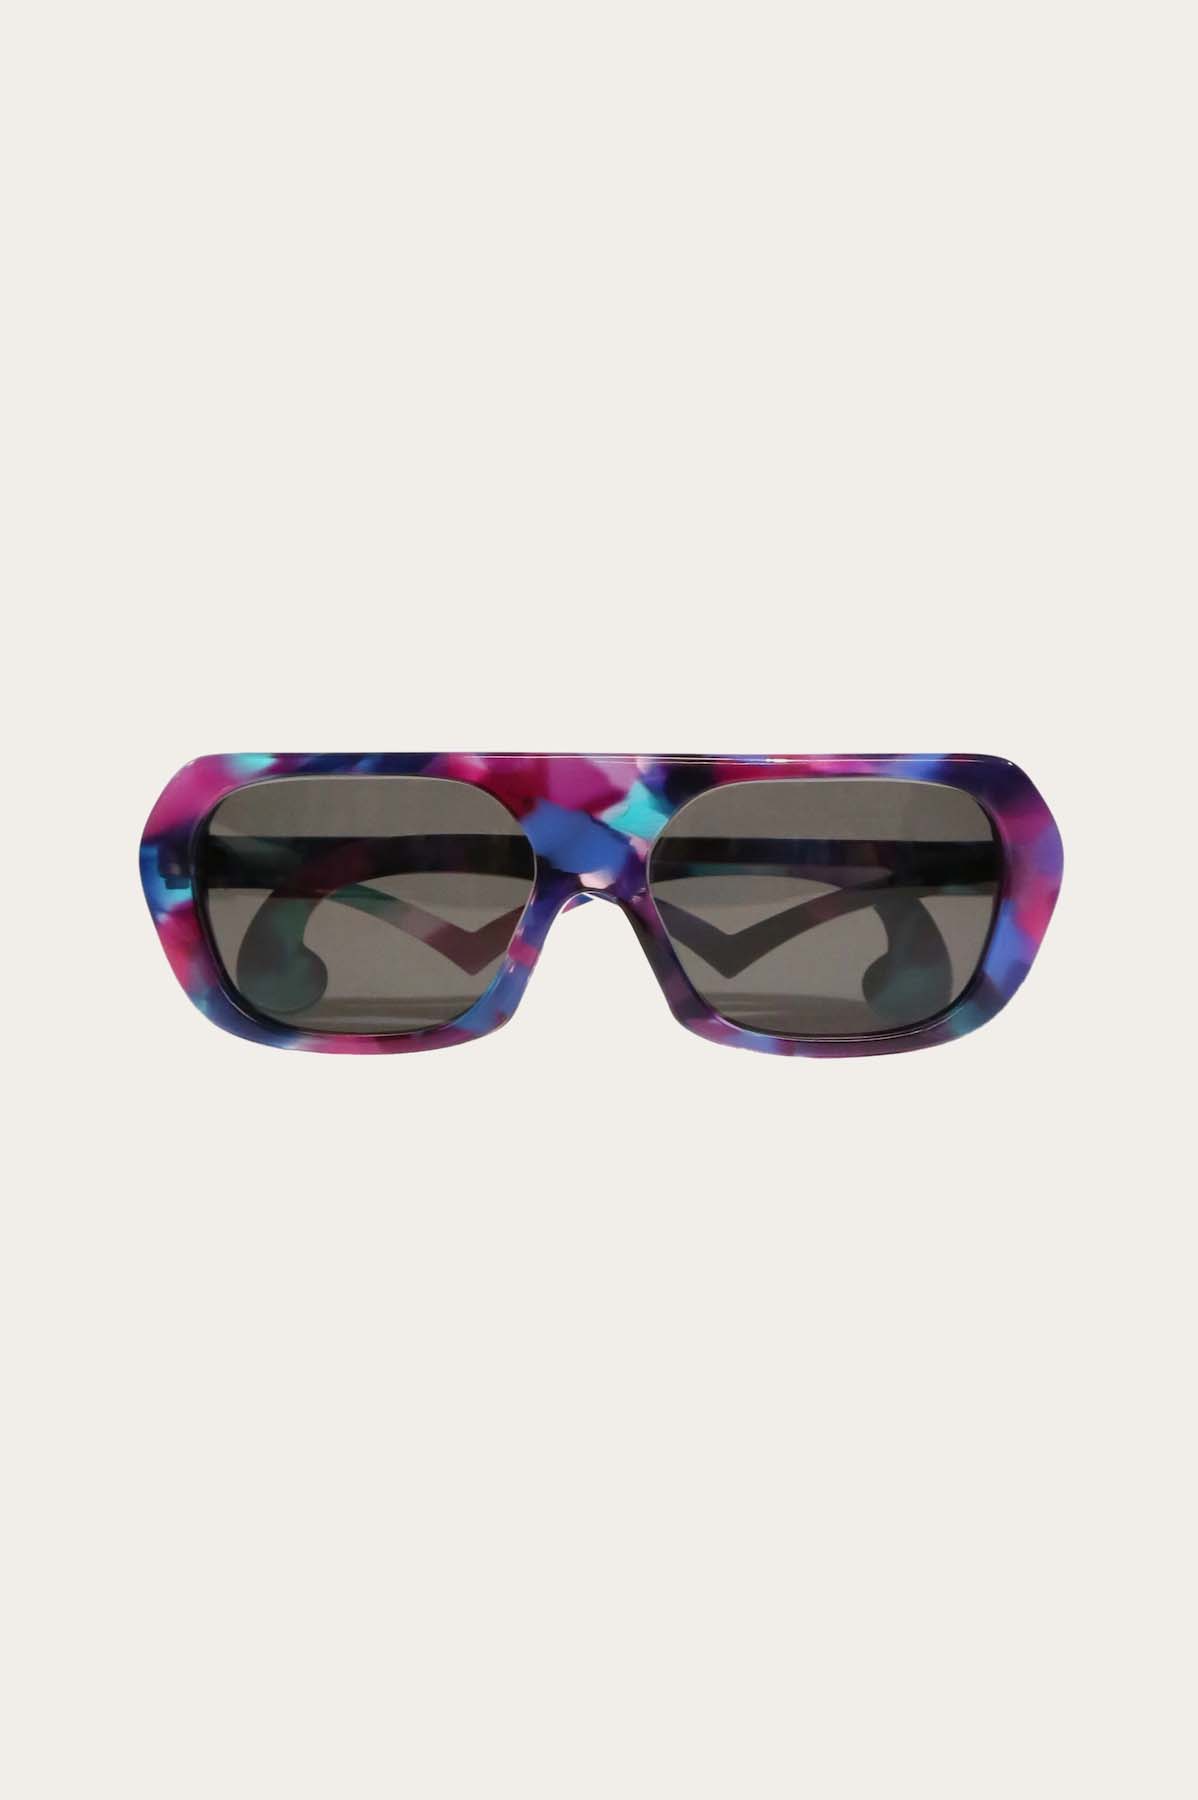 THE ANNA Pink Blue Camo, large eyeglass frame with tinted lenses, branch with a V-Shaped design